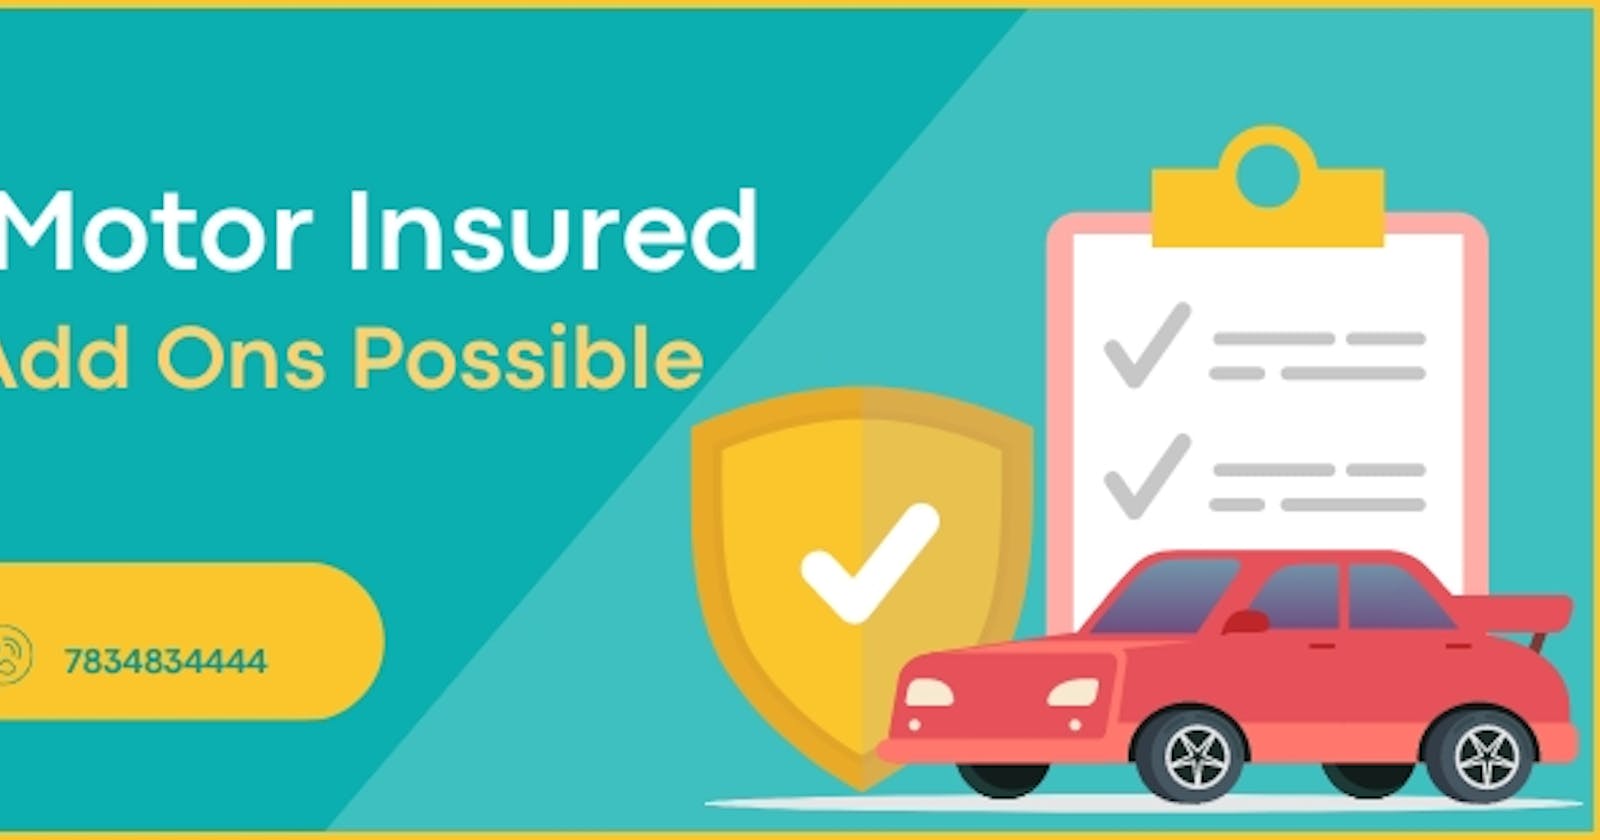 Get Your Motor Insured With The Add Ons Possible